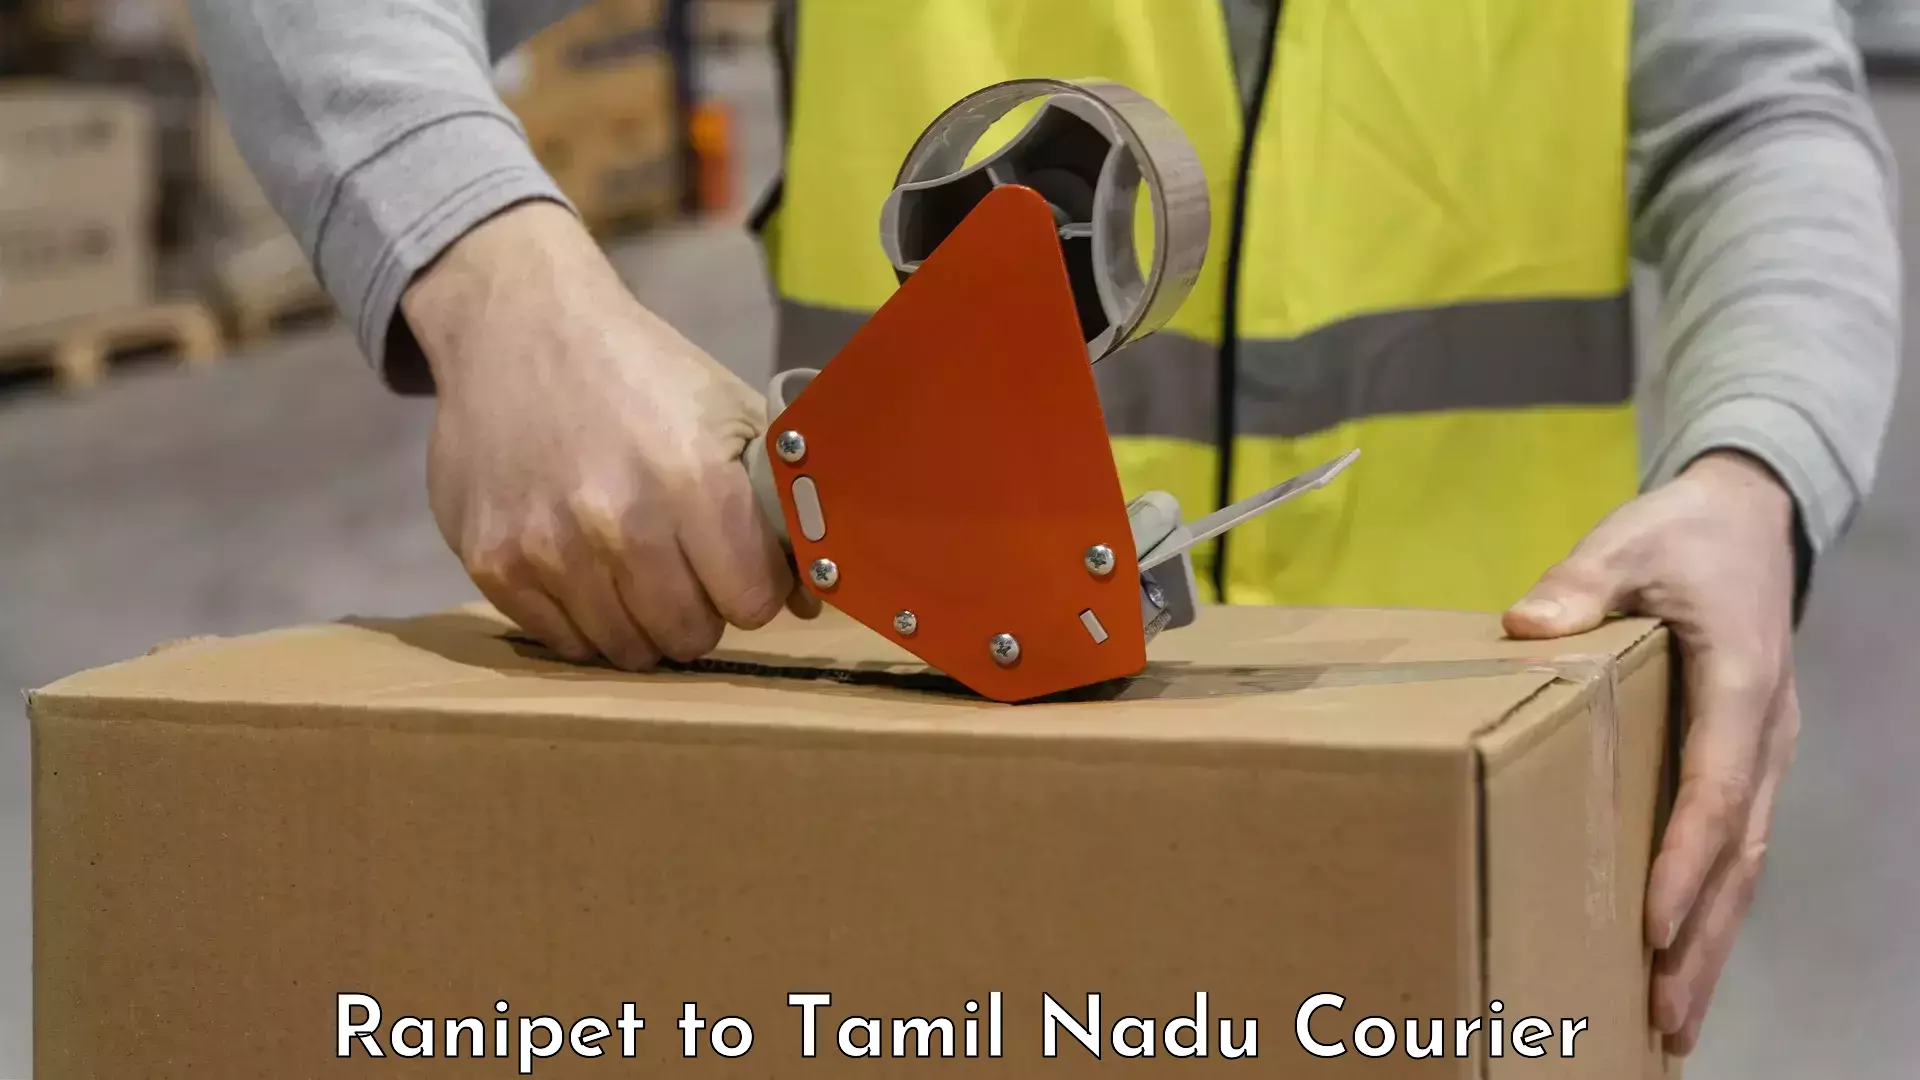 Luggage delivery network Ranipet to Tamil Nadu